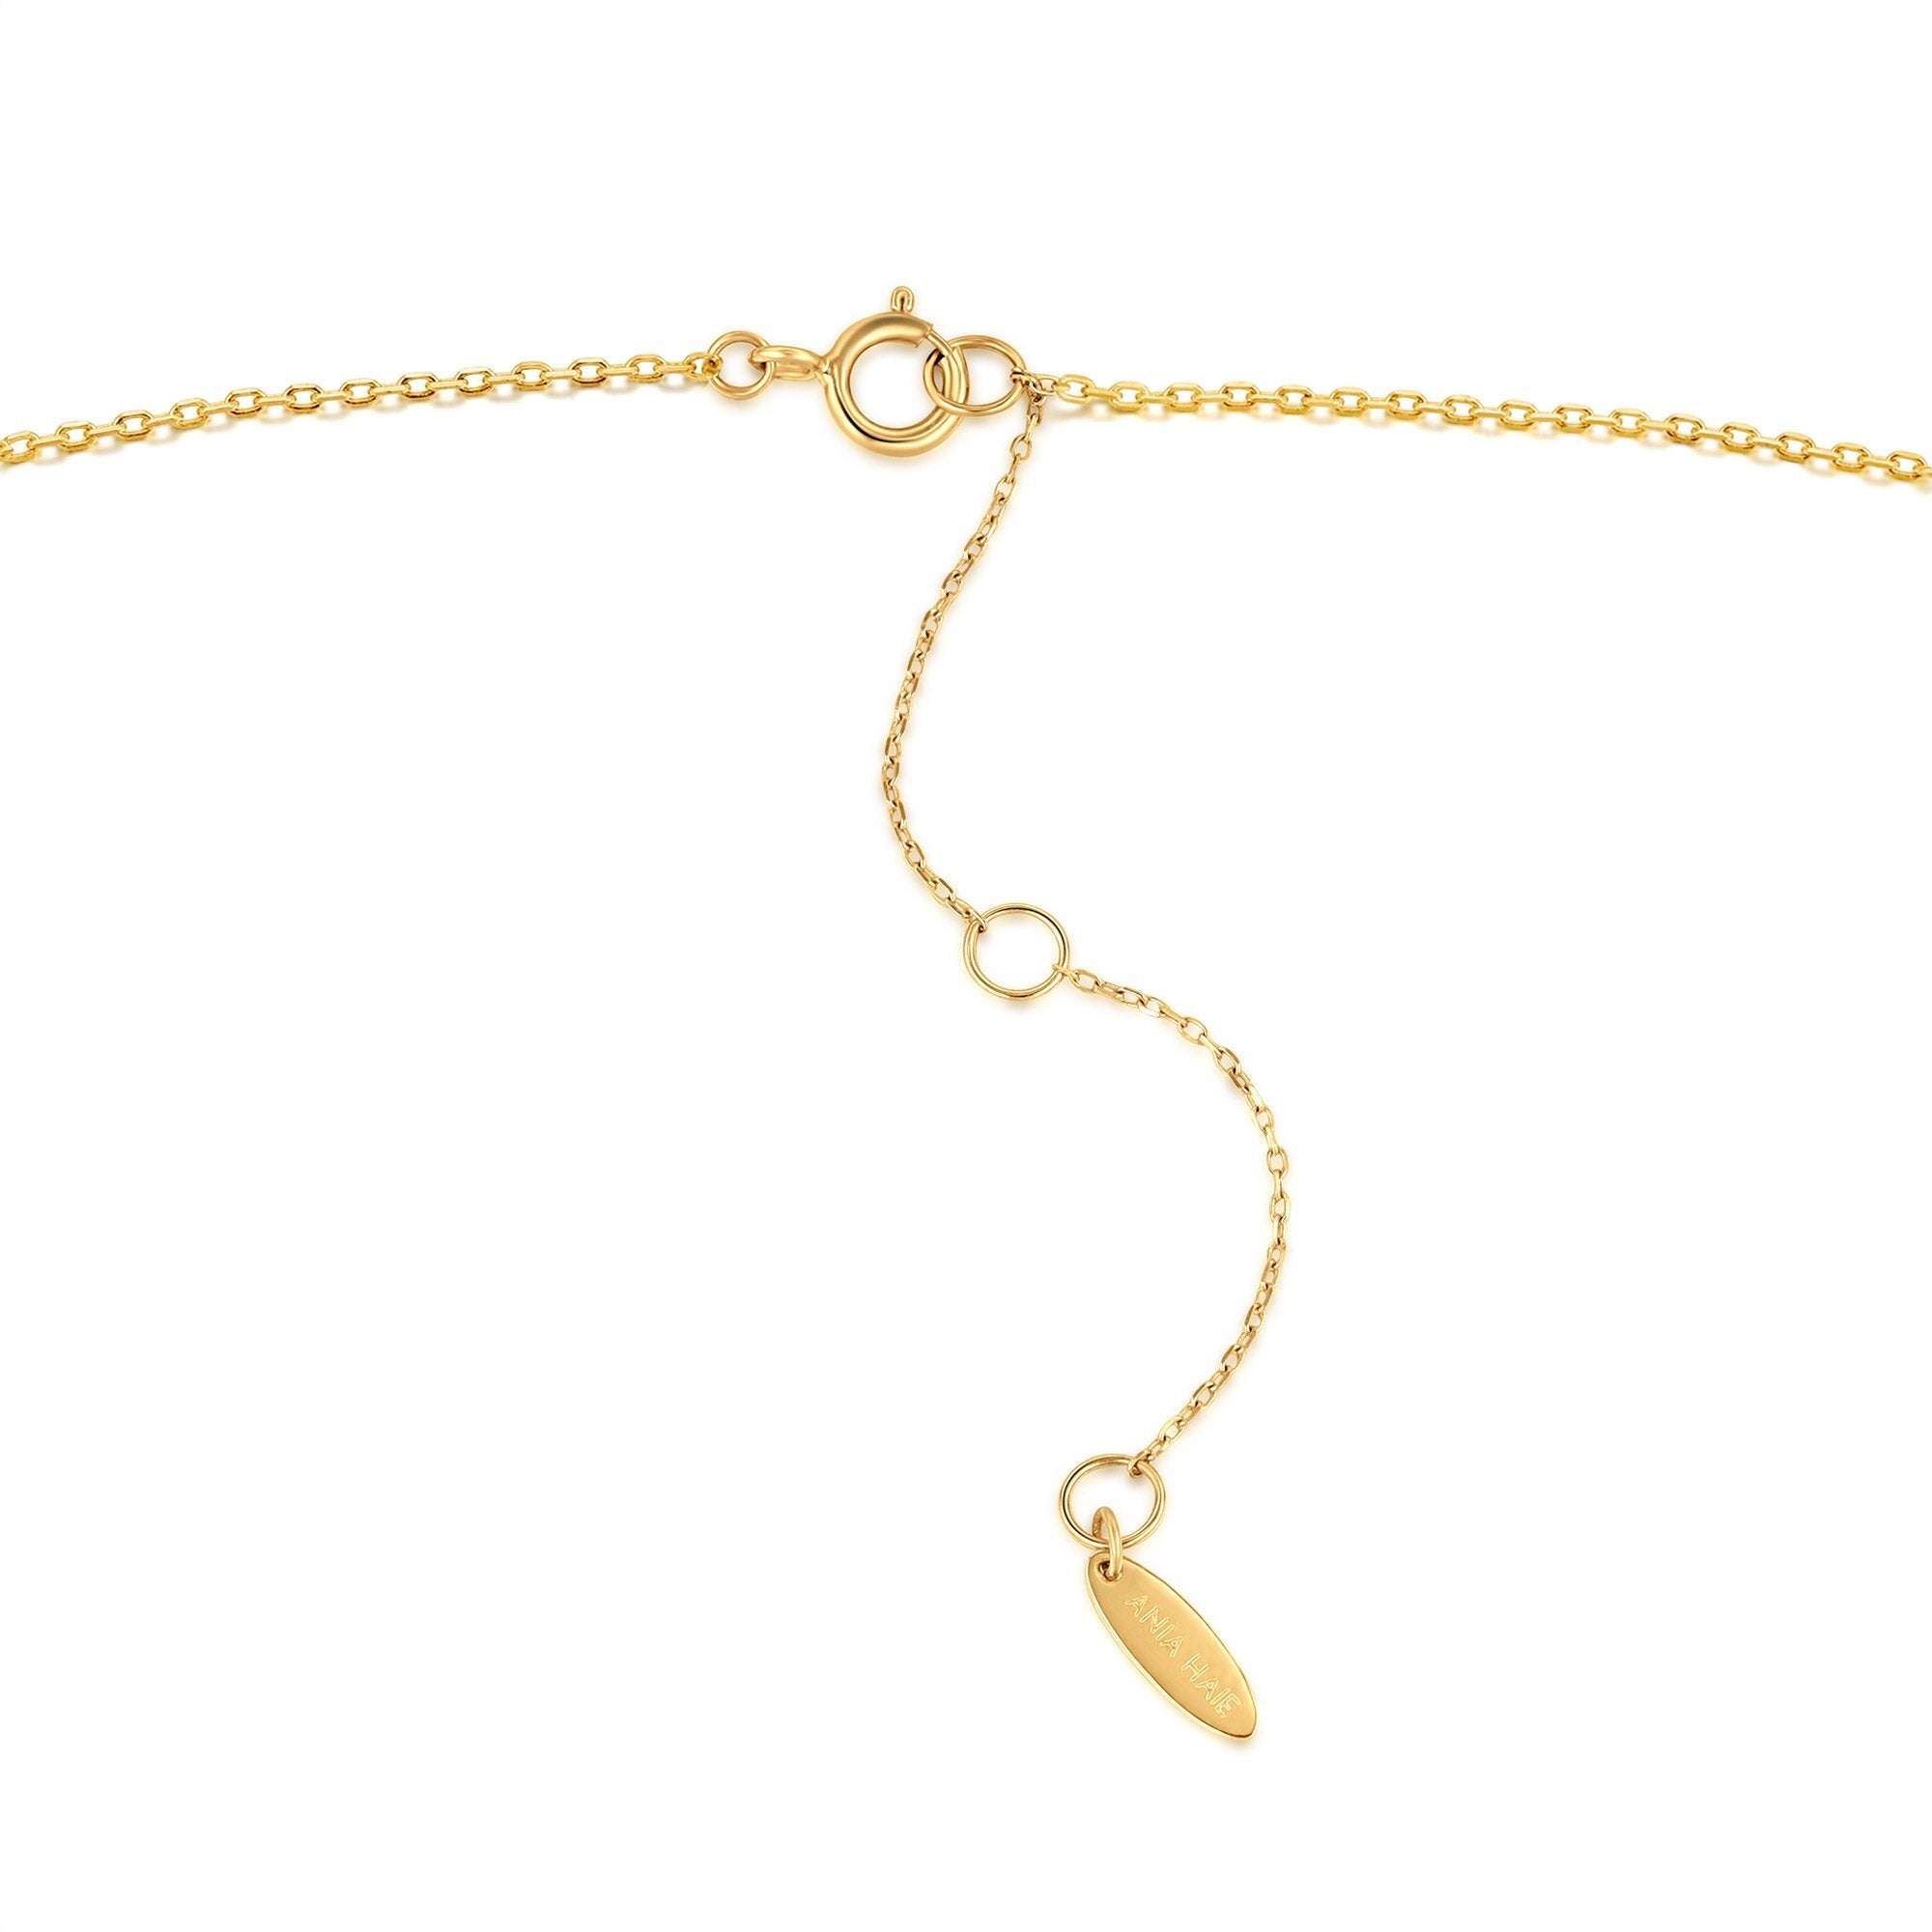 Buy 14k Gold Two Tone Gold Diamond Cut Oval Bead Chain 16-20 Inch 1.8mm  Online at SO ICY JEWELRY